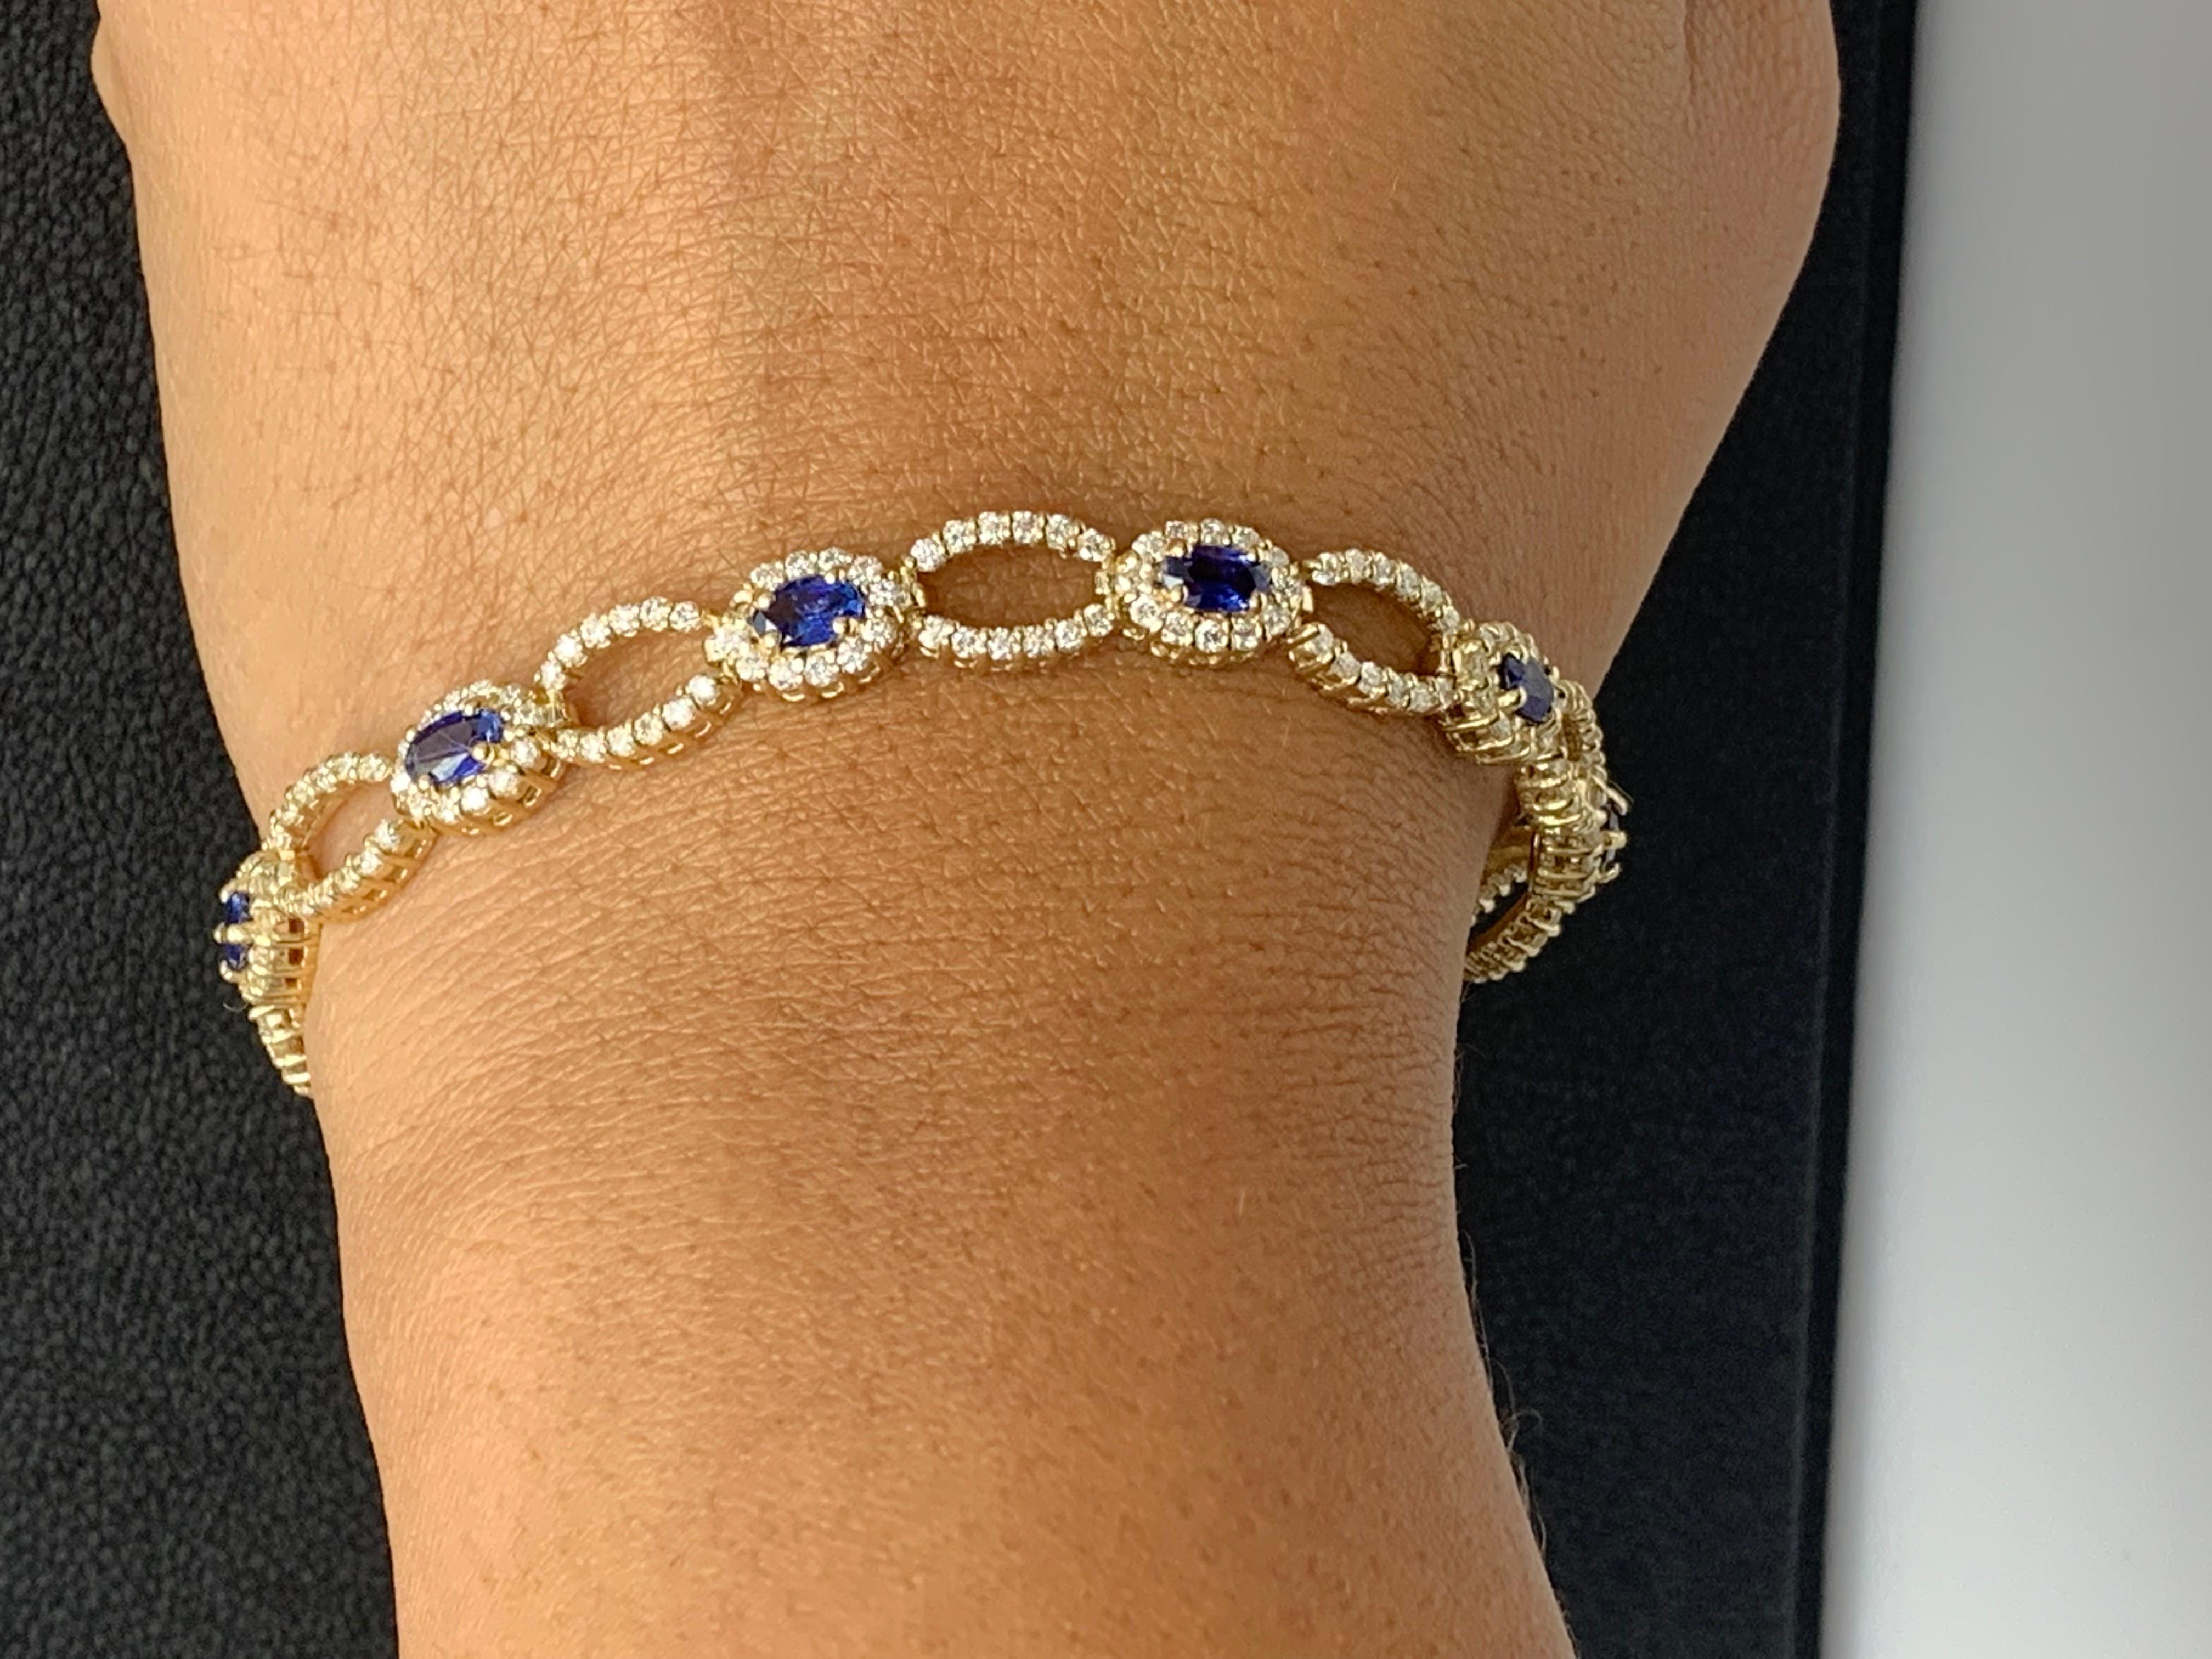 Open-Work 3.60 Carat Blue Sapphire and Diamond Bracelet in 14K Yellow Gold For Sale 6